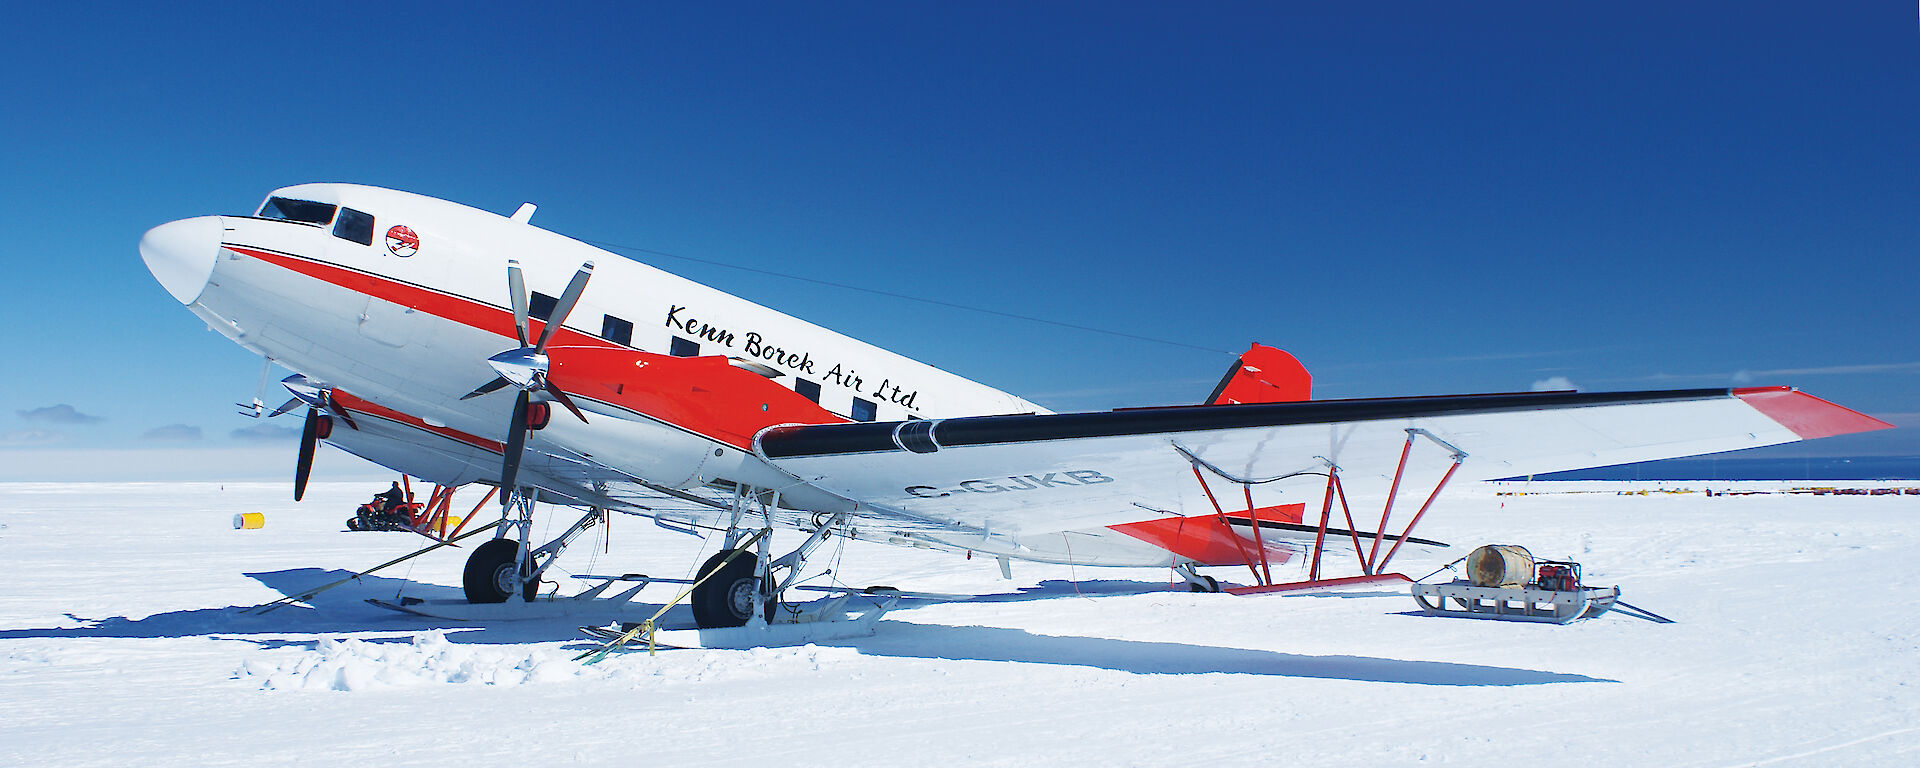 This Basler BT-67 aircraft used by the ICECAP project.